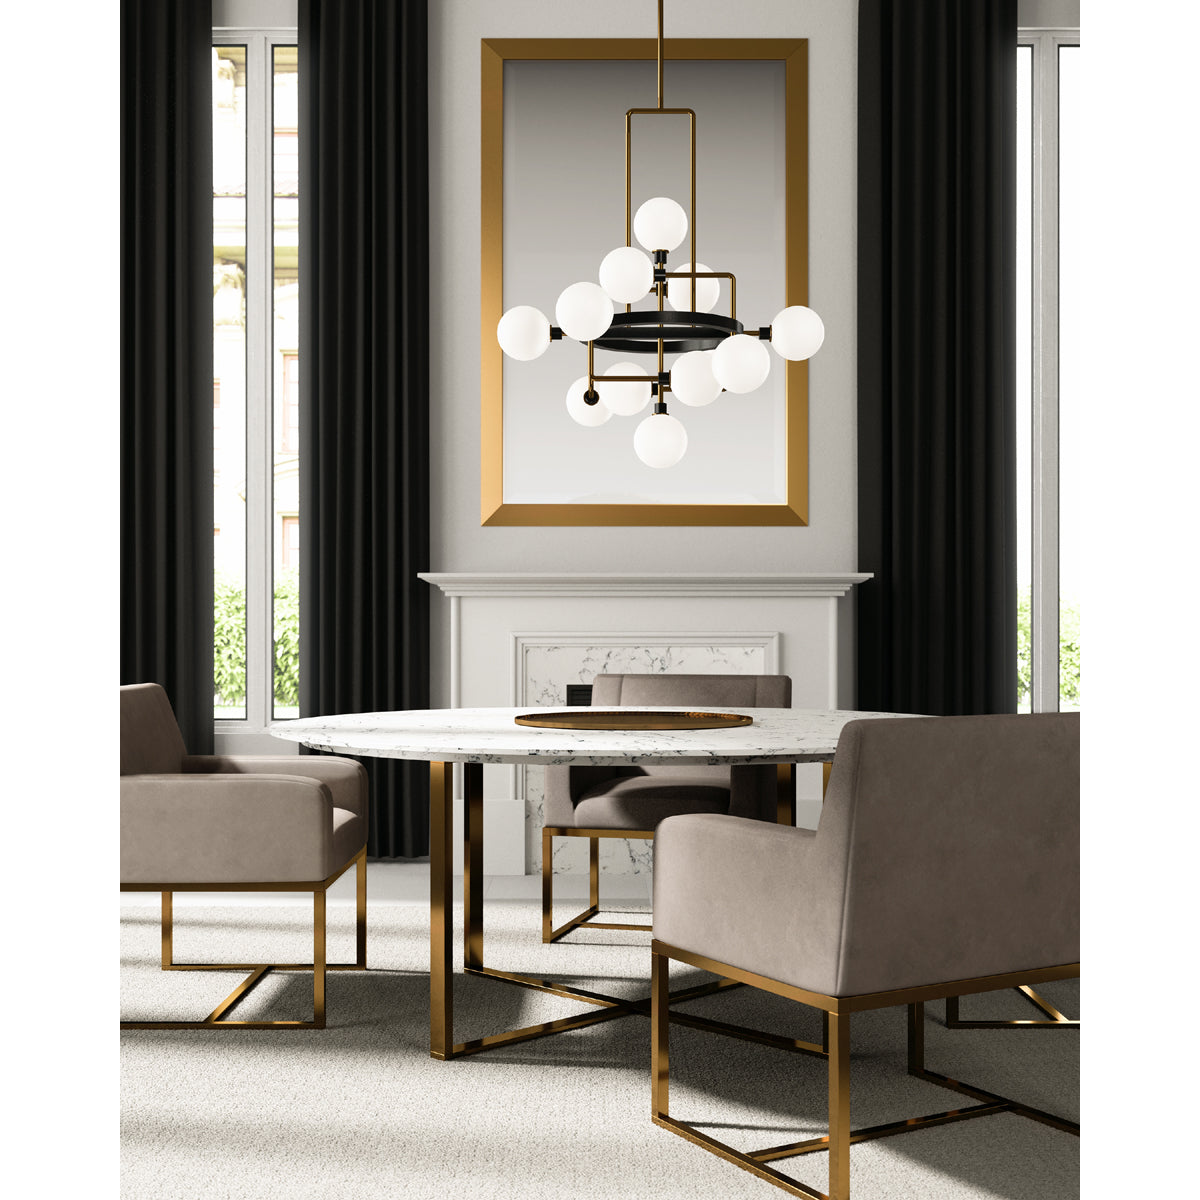 viaggio chandelier hanging over round marble dining table